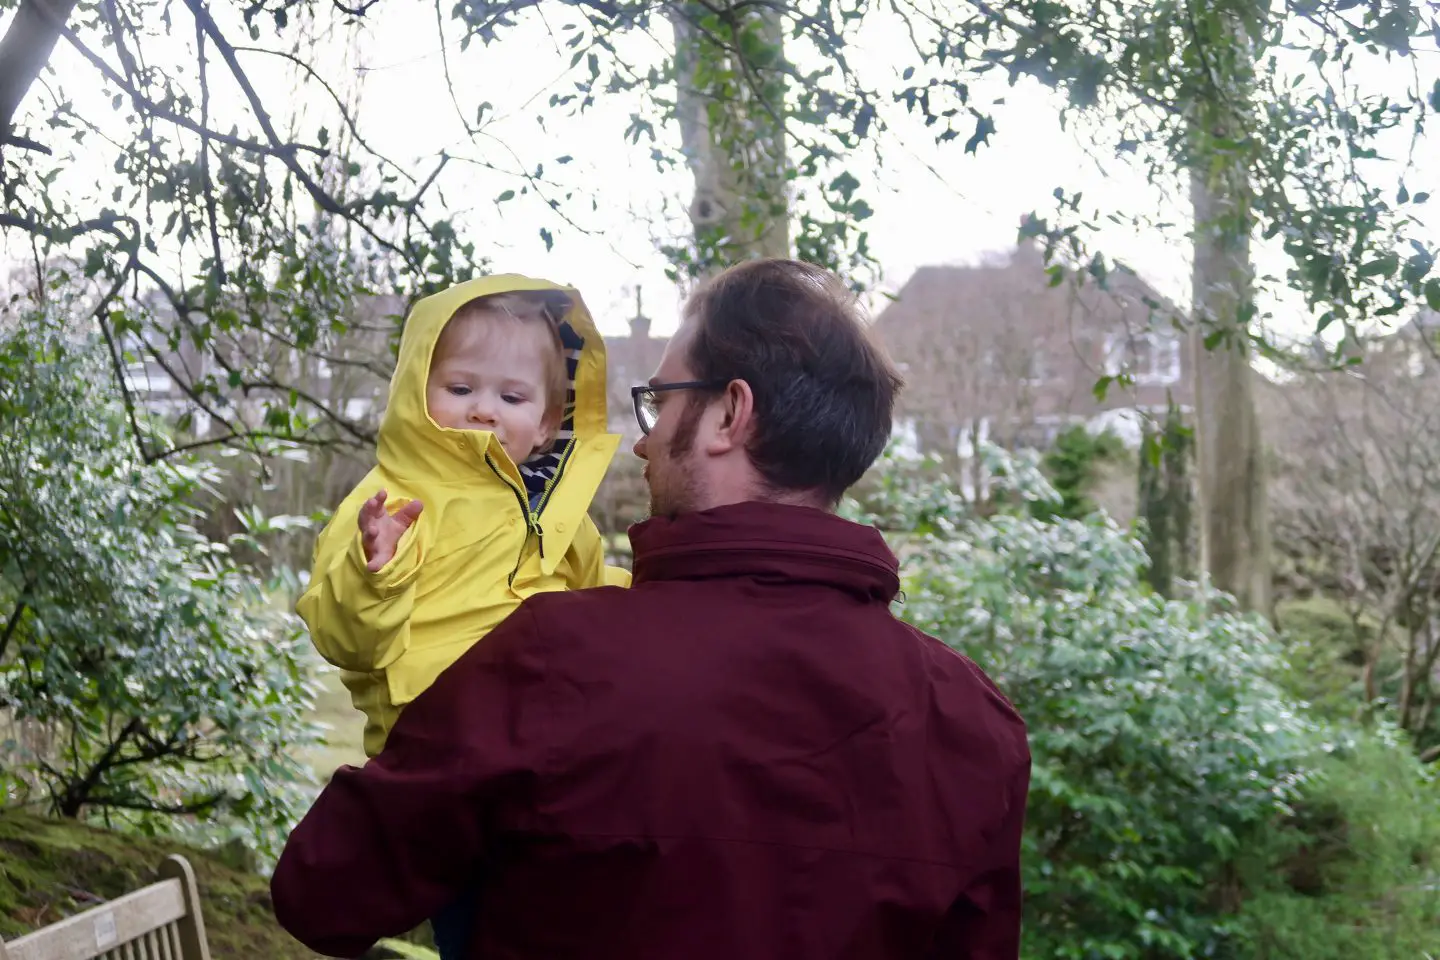 A father holding his son. He is facing away from the camera, while the boy faces the other way with the hood of his yellow jacket up